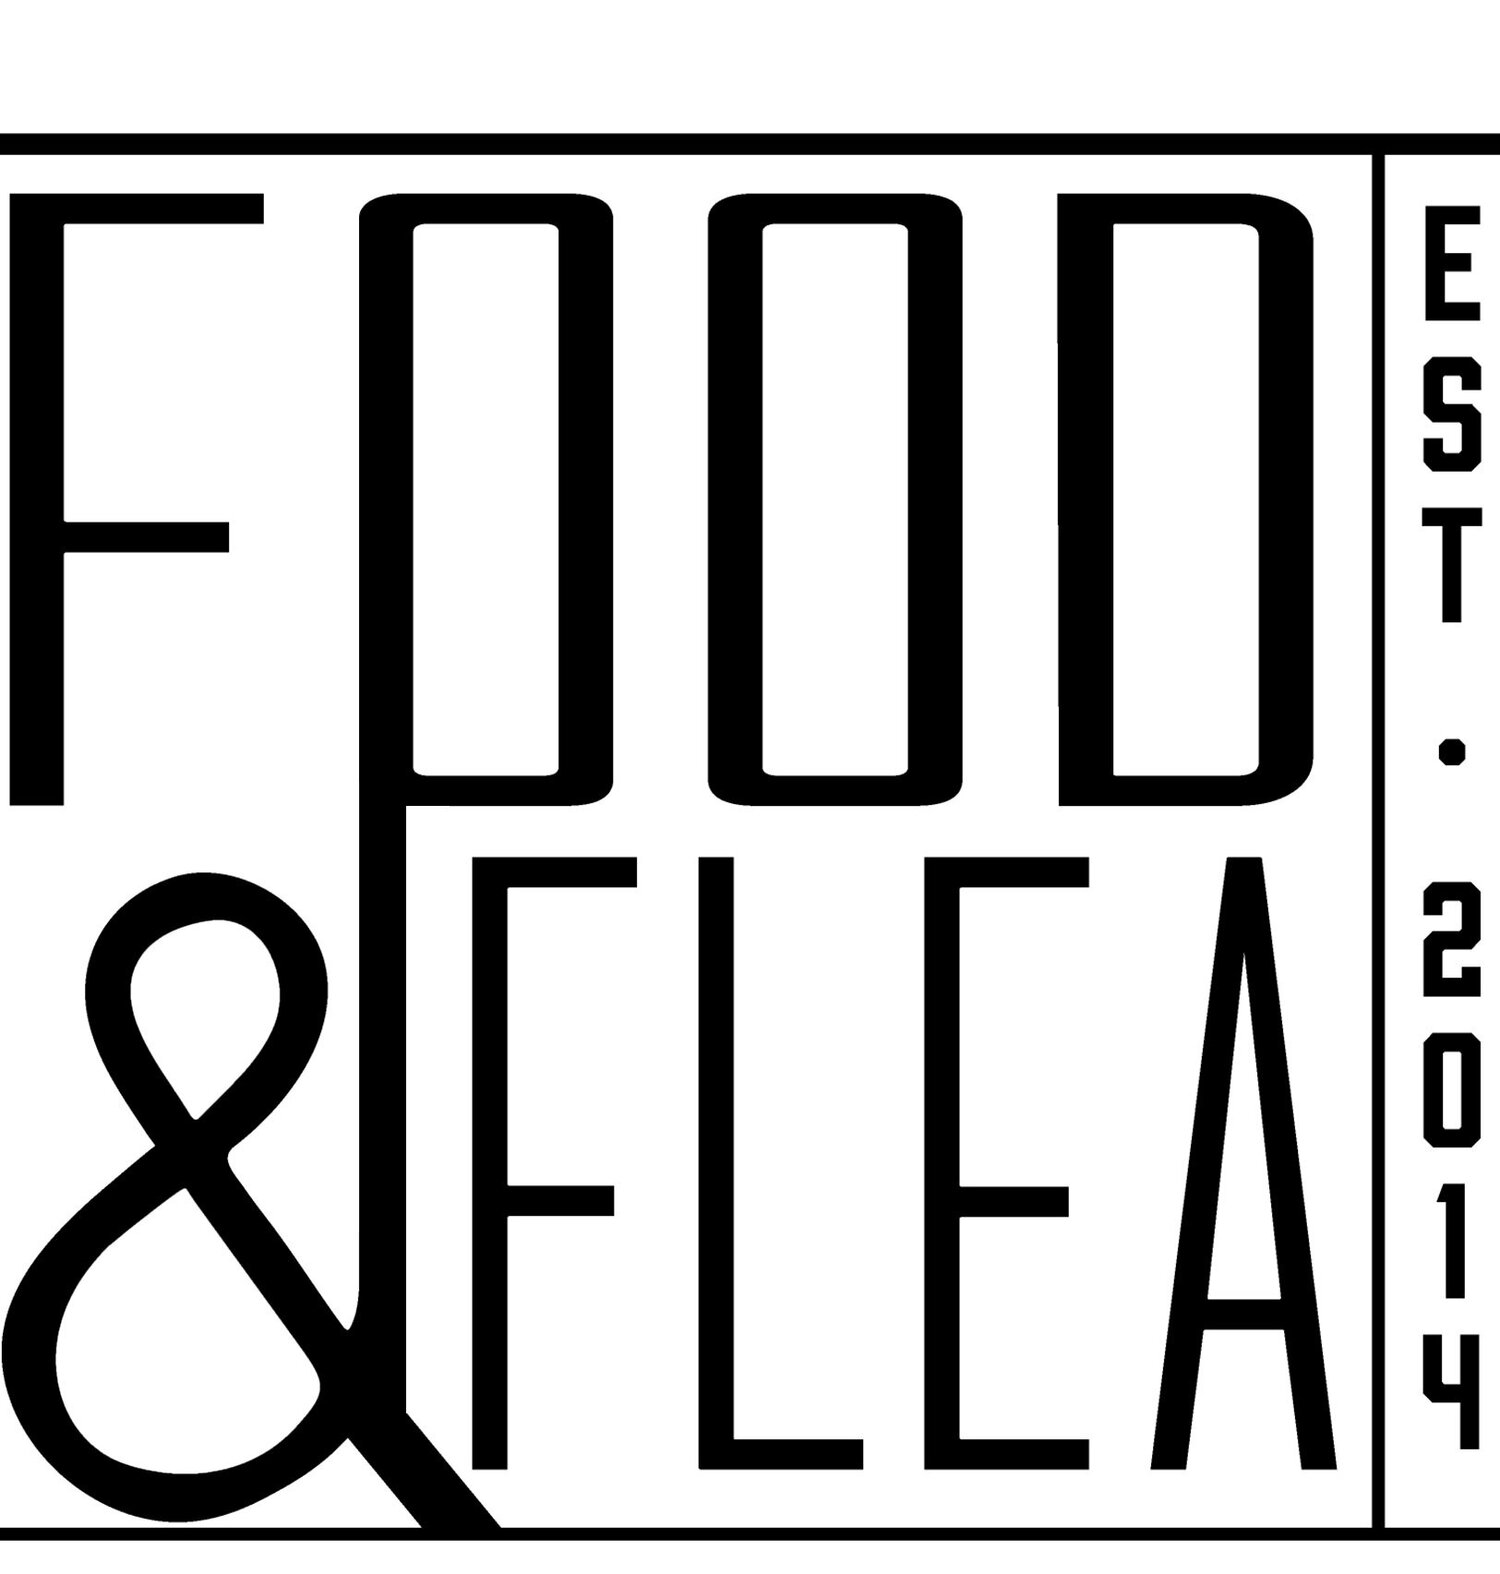 2019 Downtown September Food and Flea Market